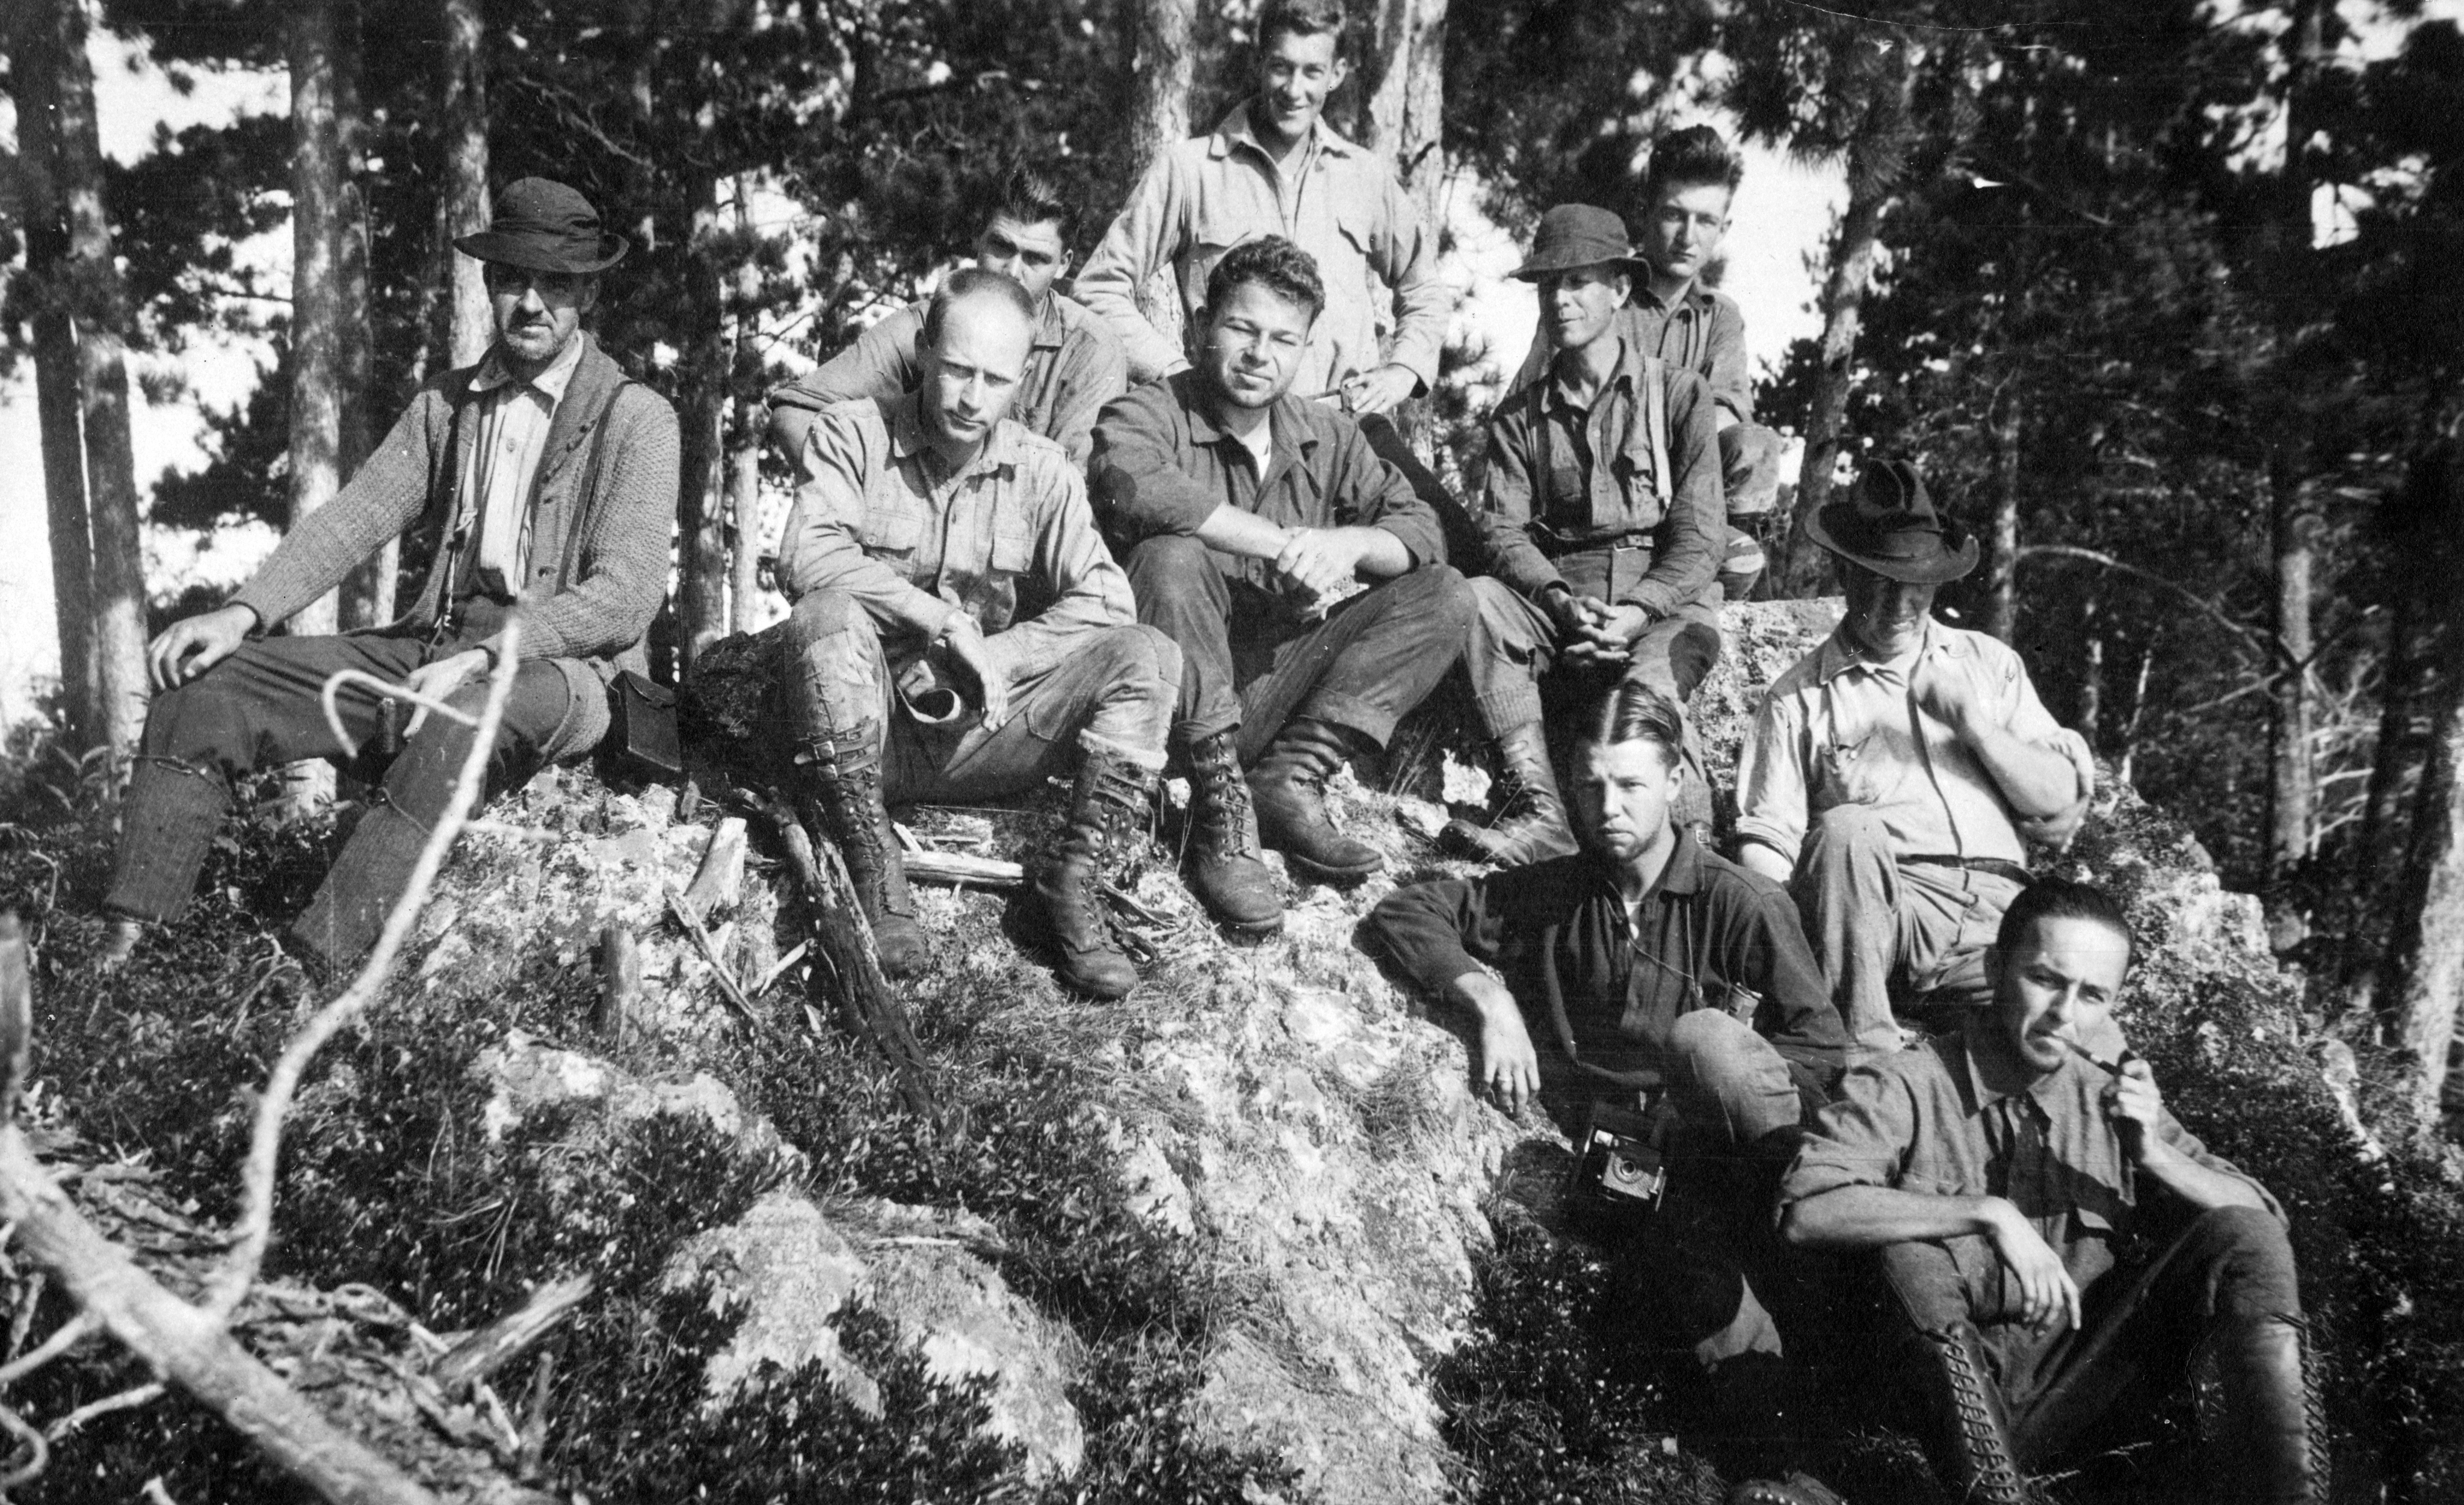 Group of geologists posing on a rock outcropping out in the field. Date unknown.